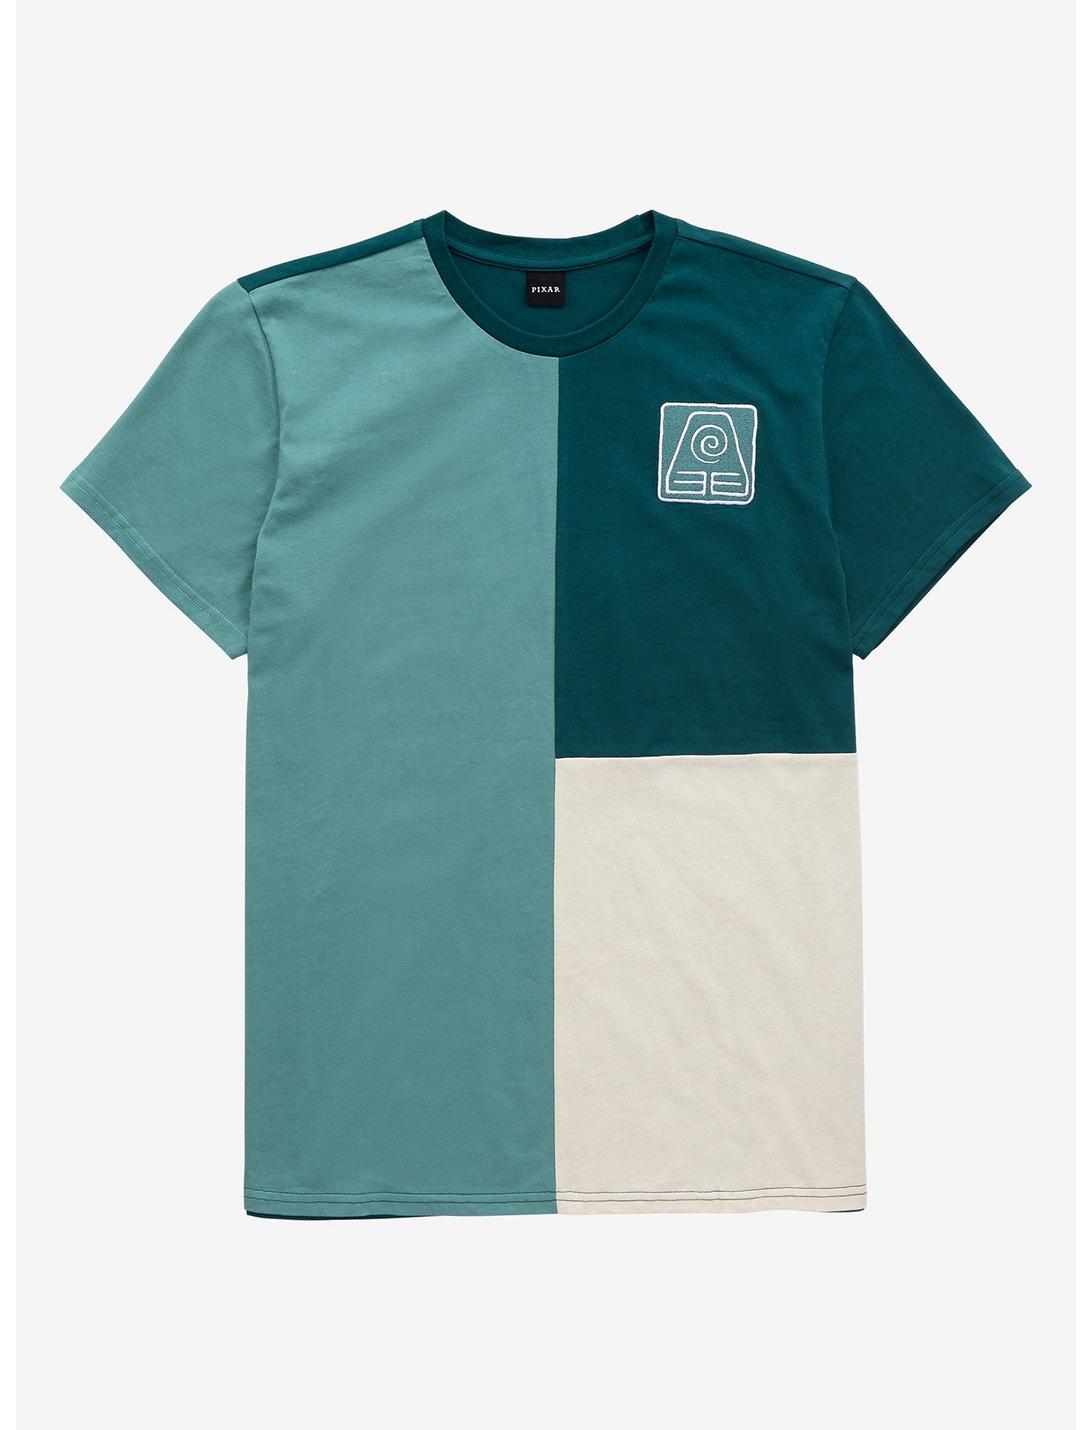 Avatar: The Last Airbender Earth Kingdom Color Block T-Shirt - BoxLunch Exclusive, GREEN, hi-res